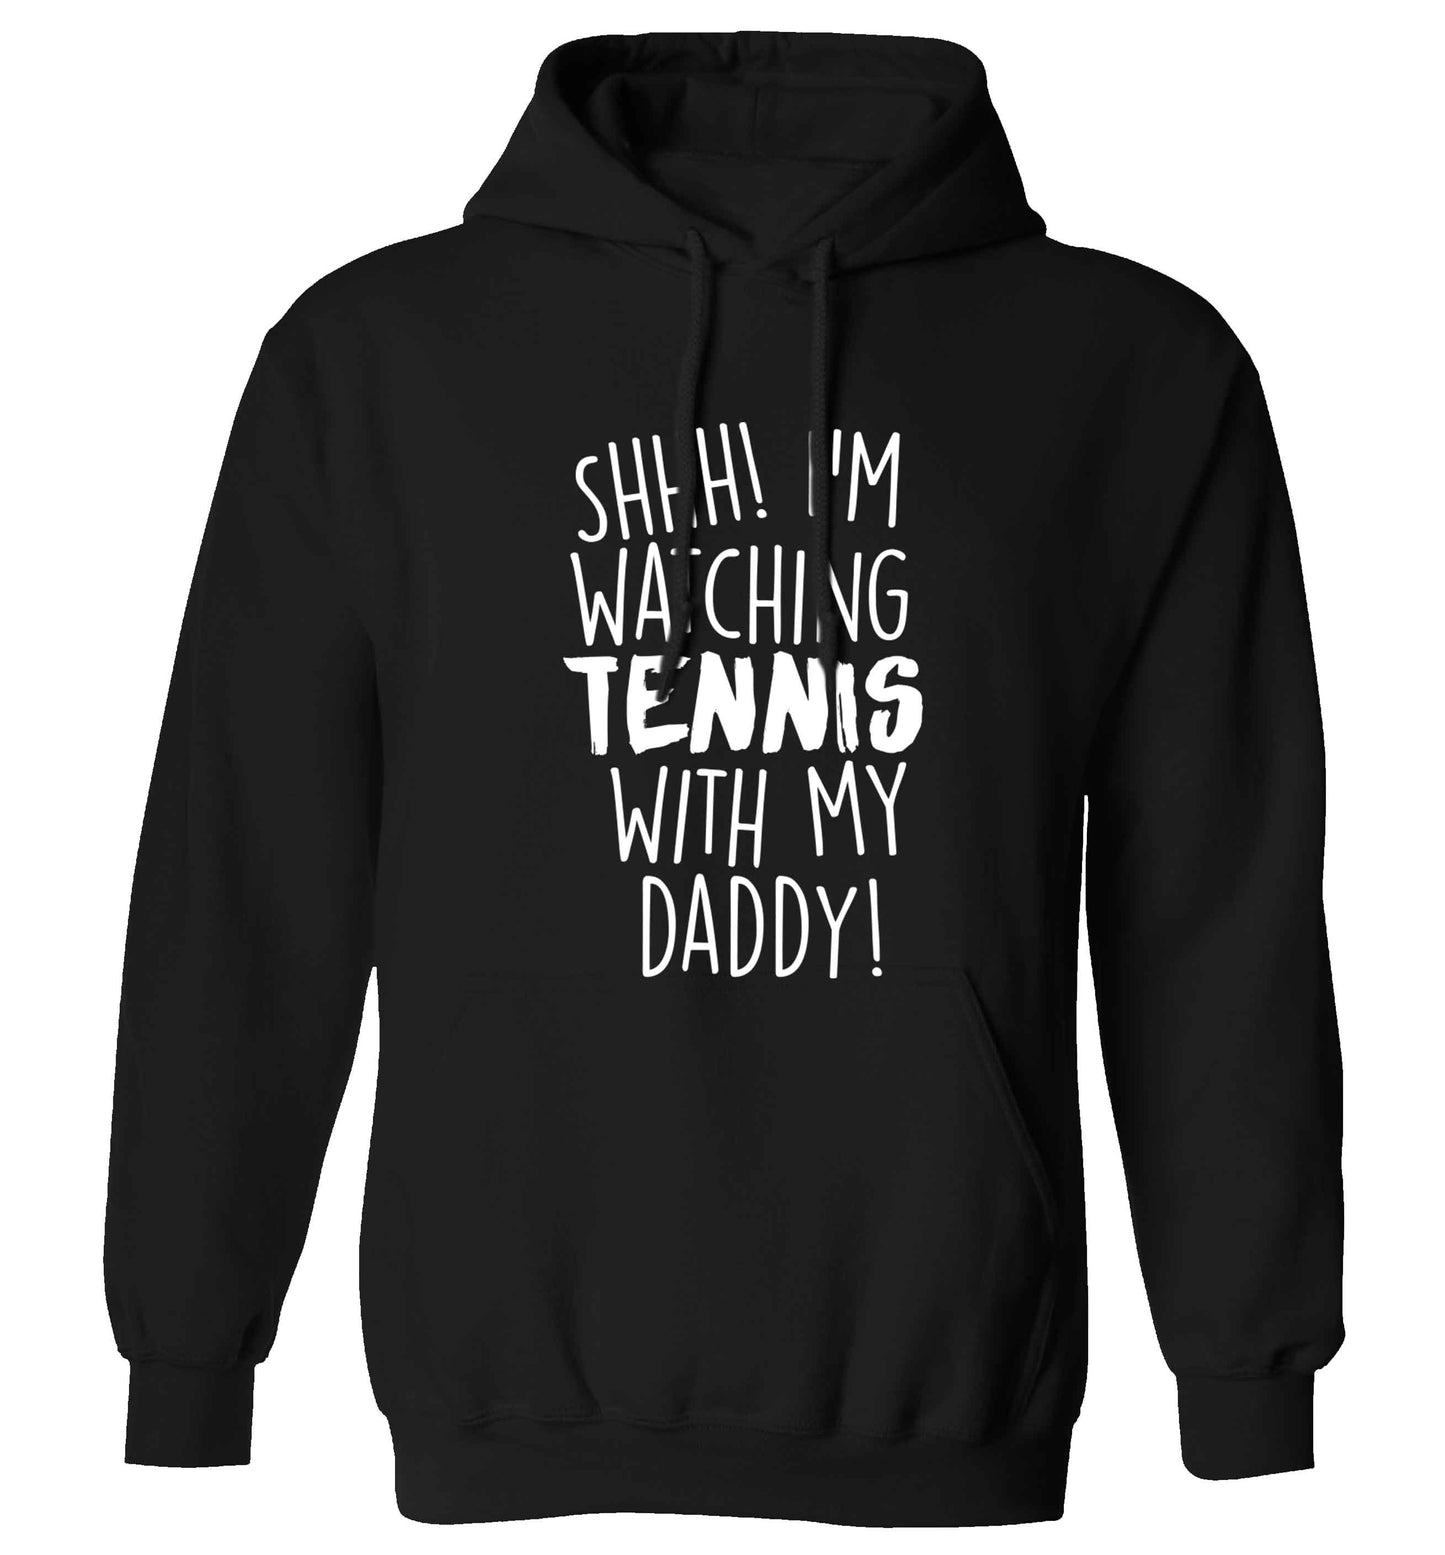 Shh! I'm watching tennis with my daddy! adults unisex black hoodie 2XL